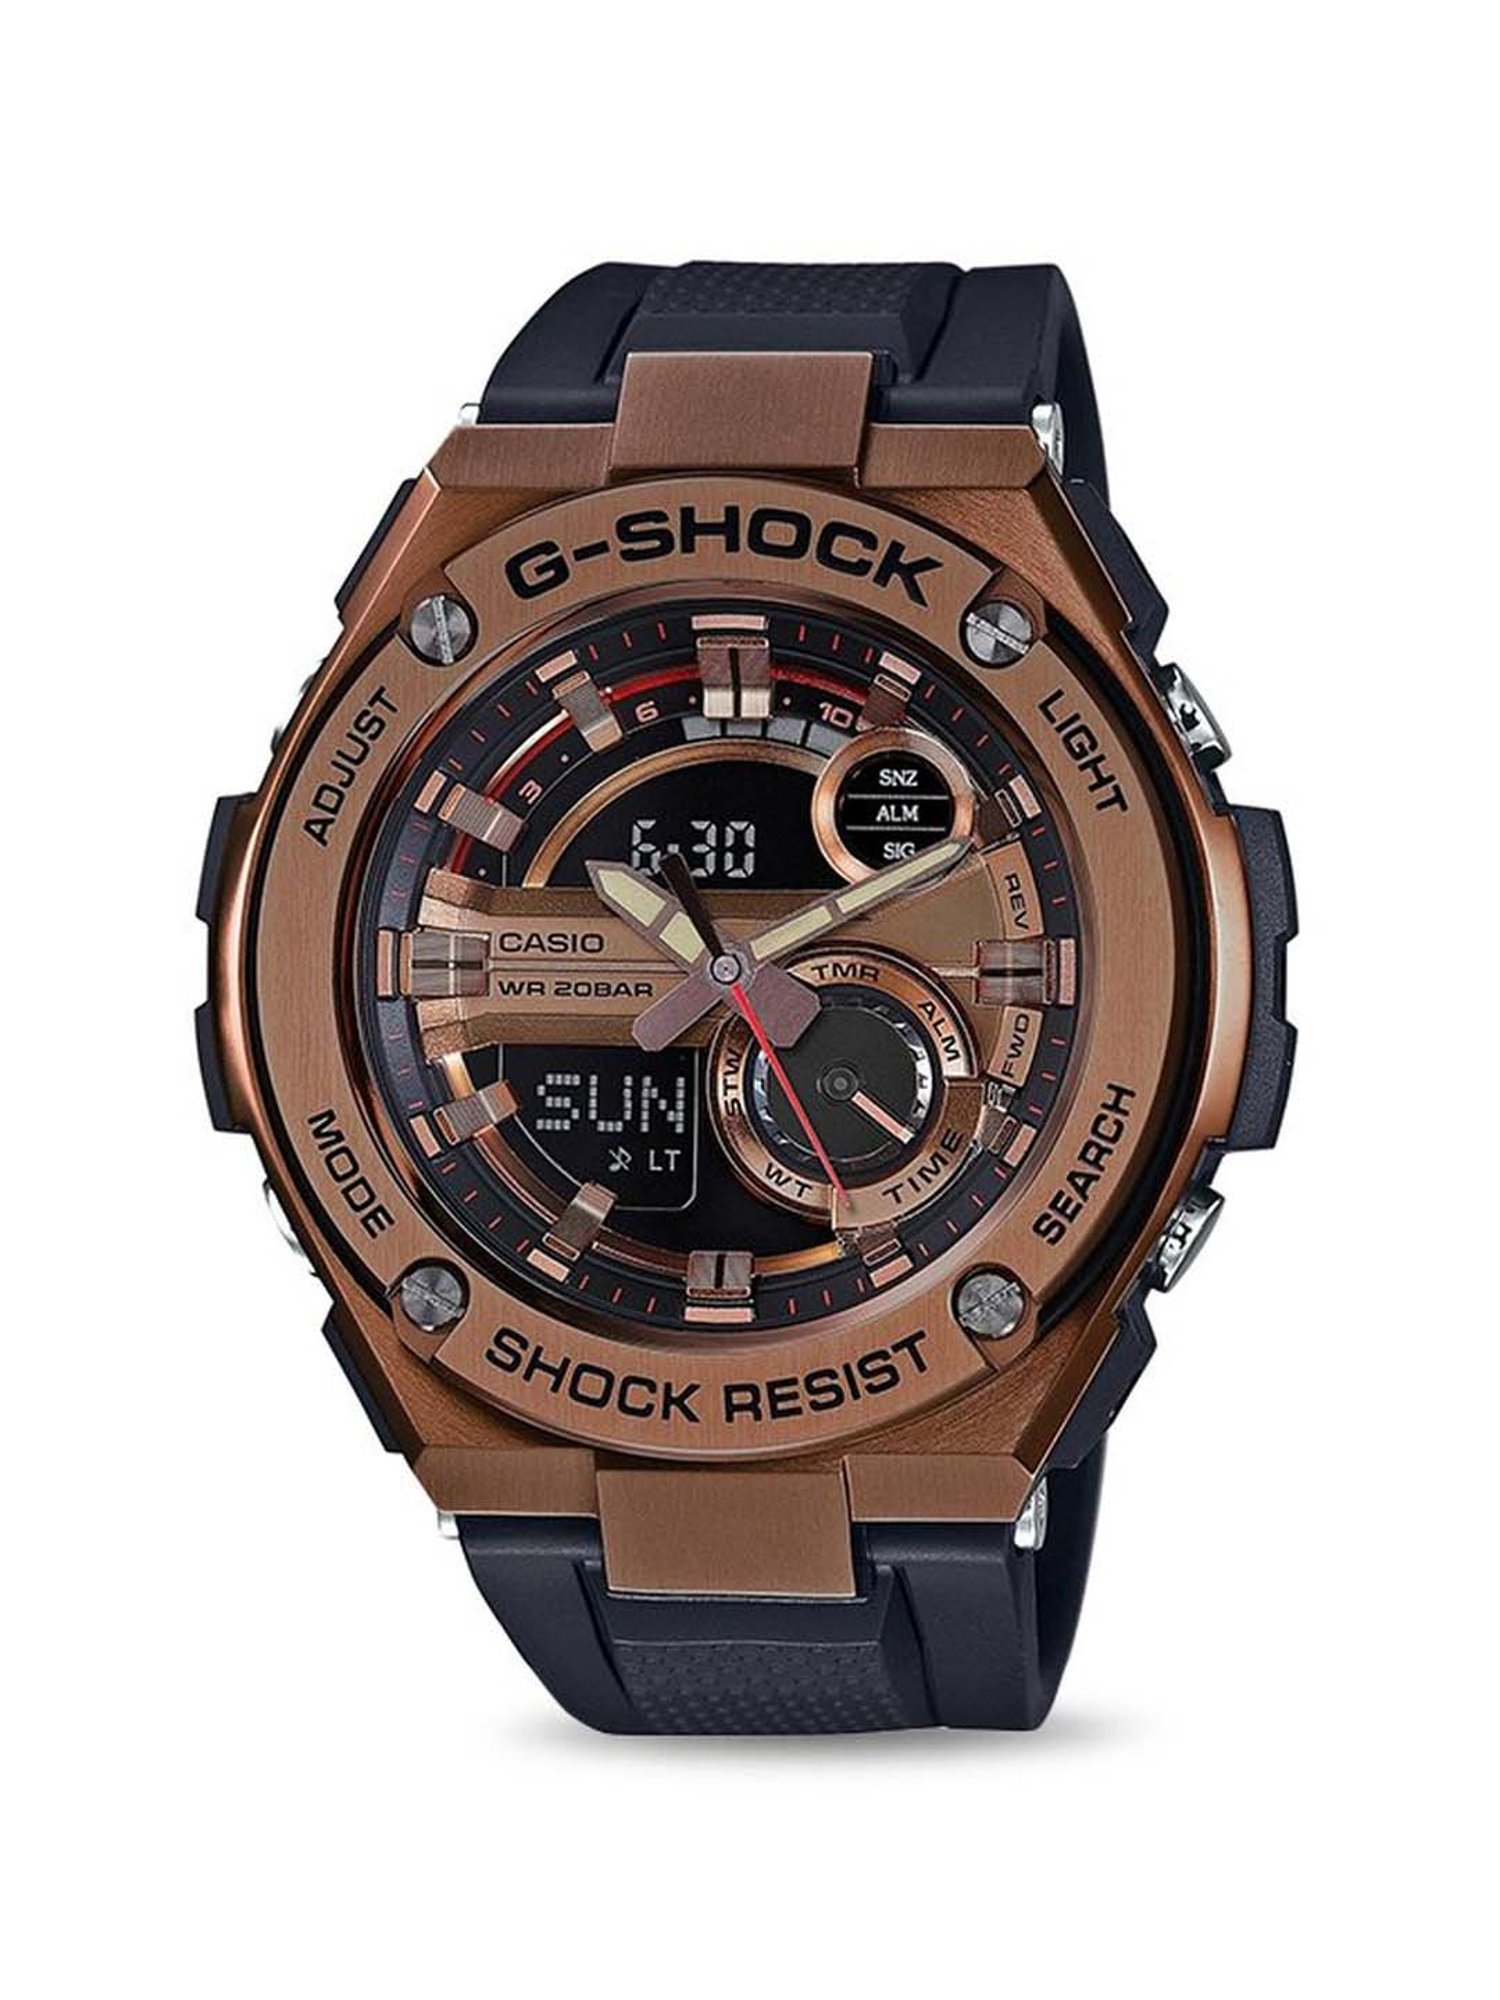 Casio 【国内正規品】G-SHOCK（ジーショック） G-STEELソーラー メンズタイプ GST-B400XD-1A2JF for  Rs.29,855 for sale from a Seller on Chrono24